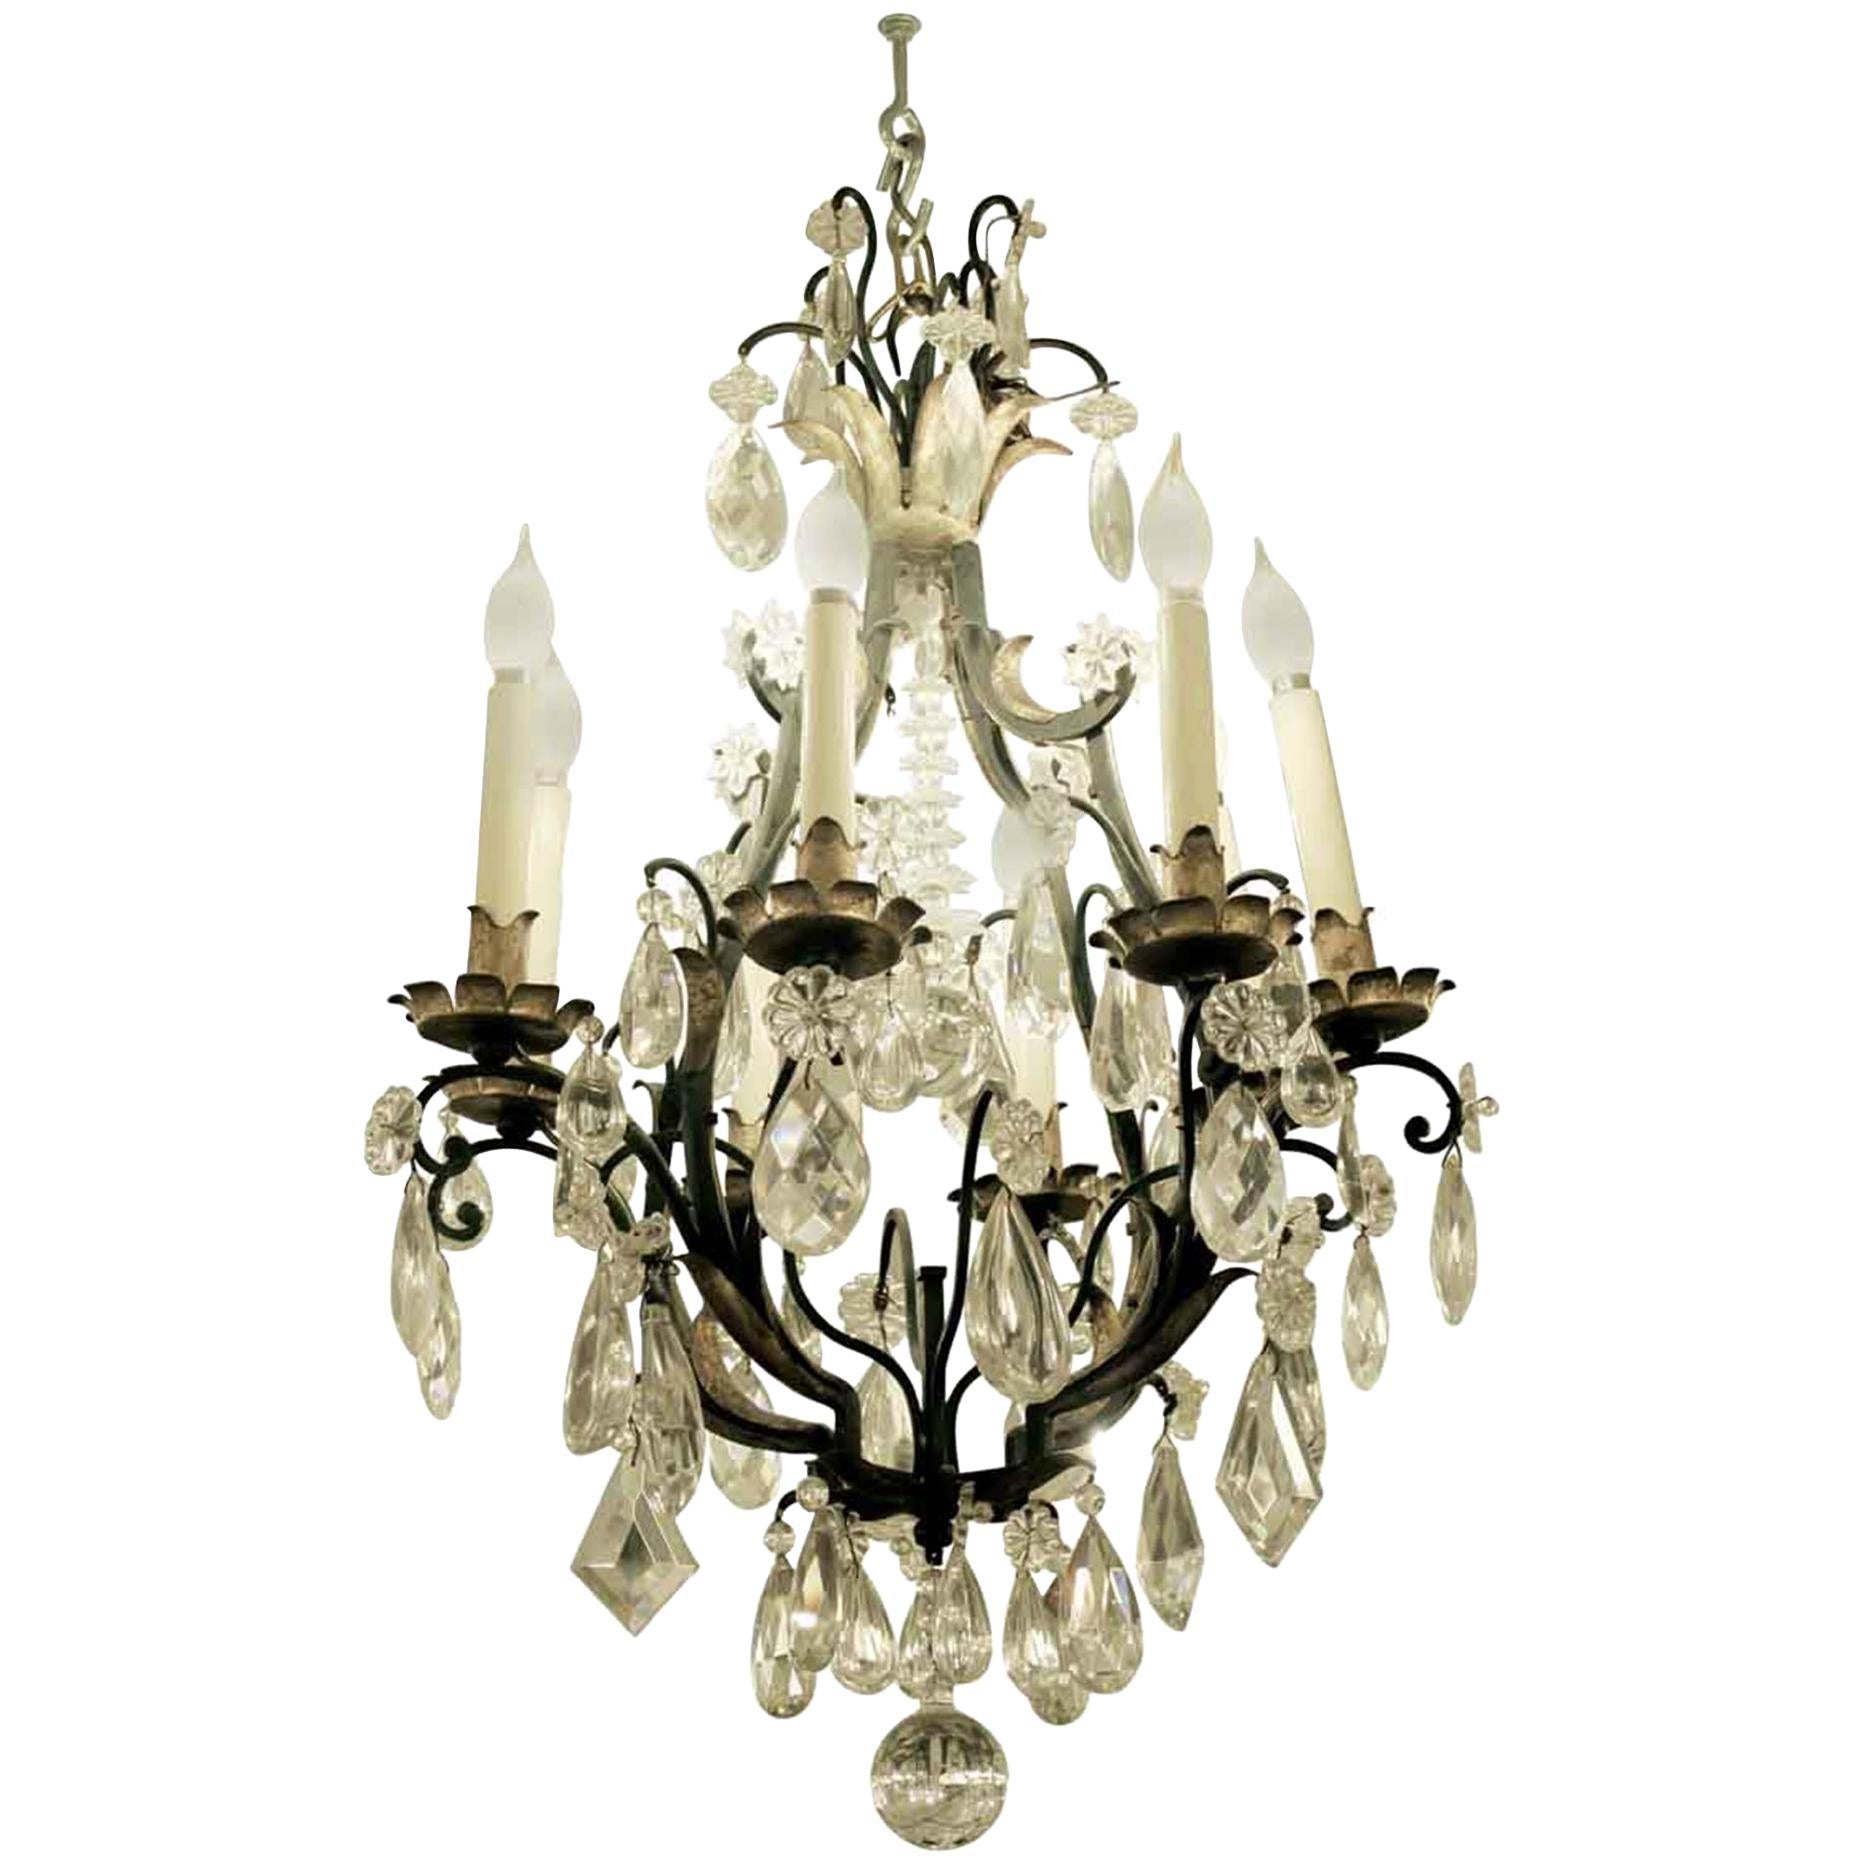 1940s Venetian Iron 6 Light Chandelier Heavy Cut Crystals Gilded Leaves For Sale